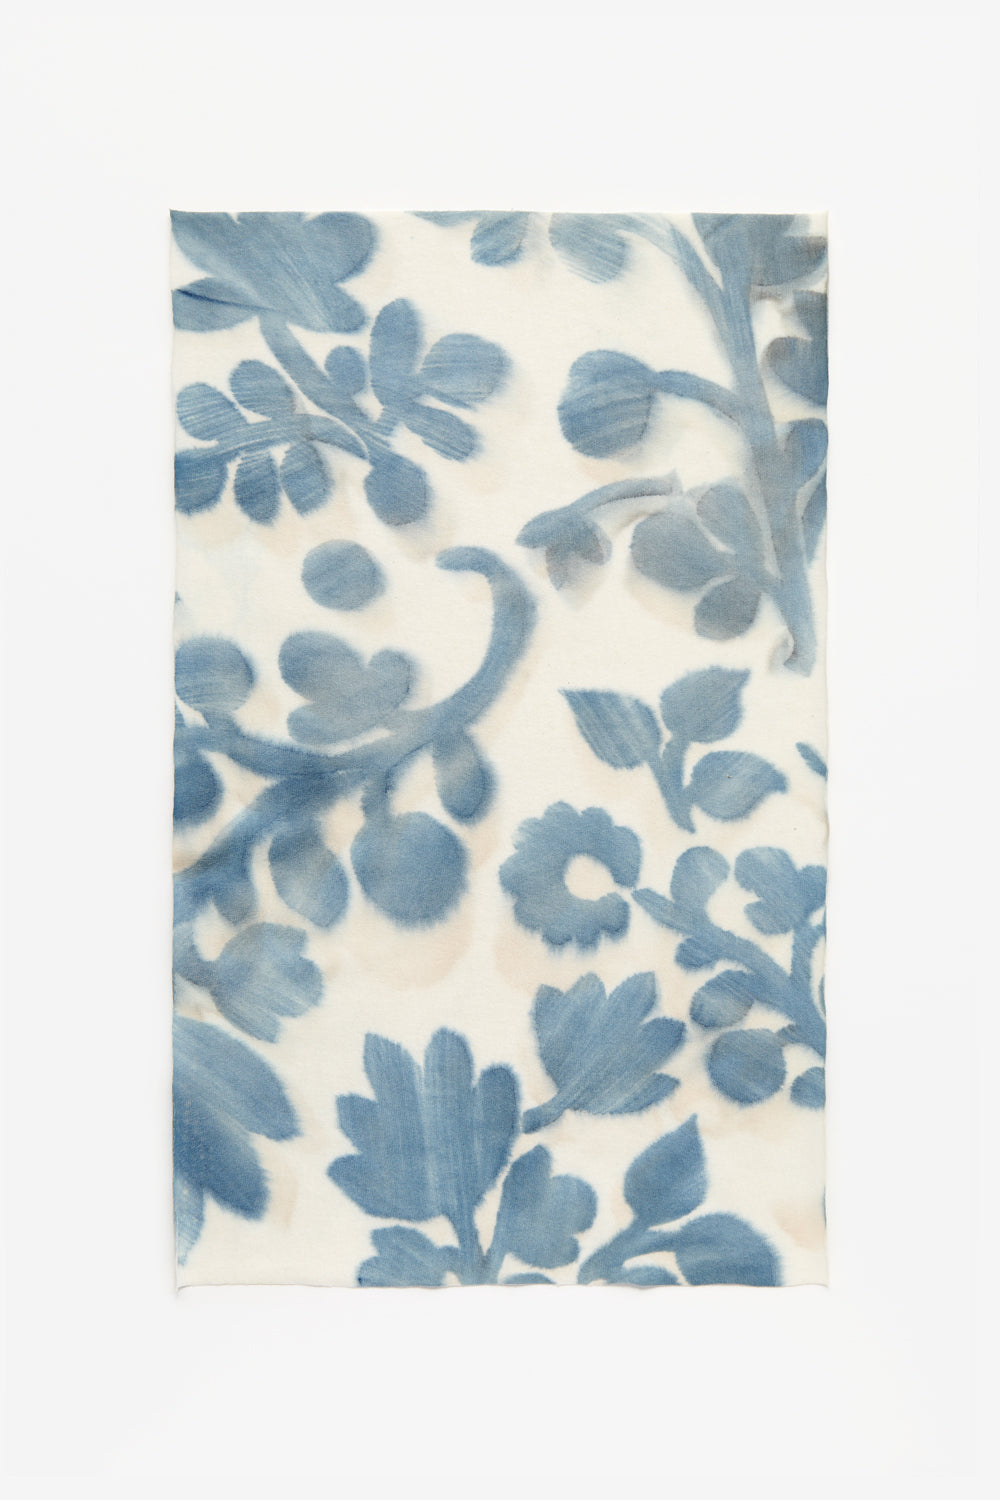 Swatch featuring indigo flowers hand-painted onto natural color fabric.